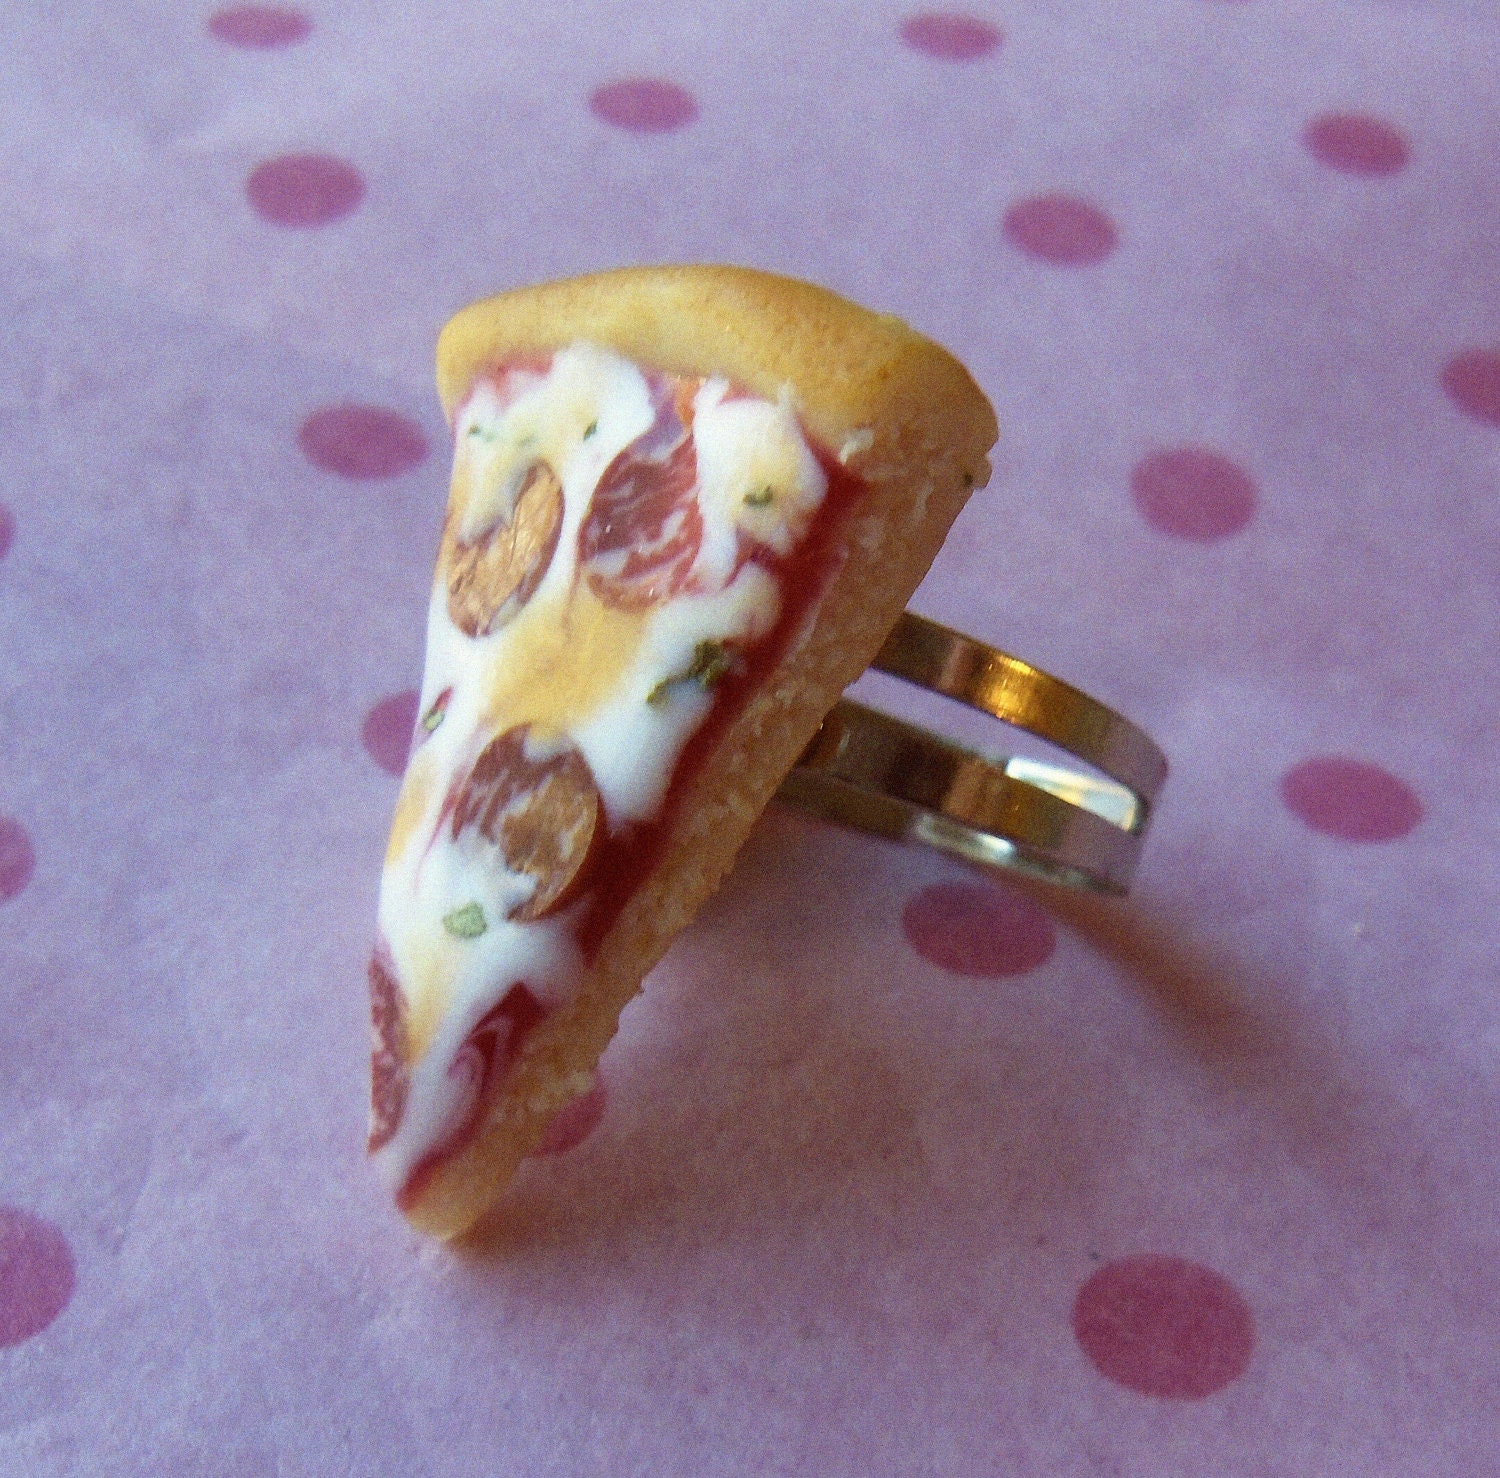 polymer clay pepperoni pizza ring by ScrumptiousDoodle on Etsy